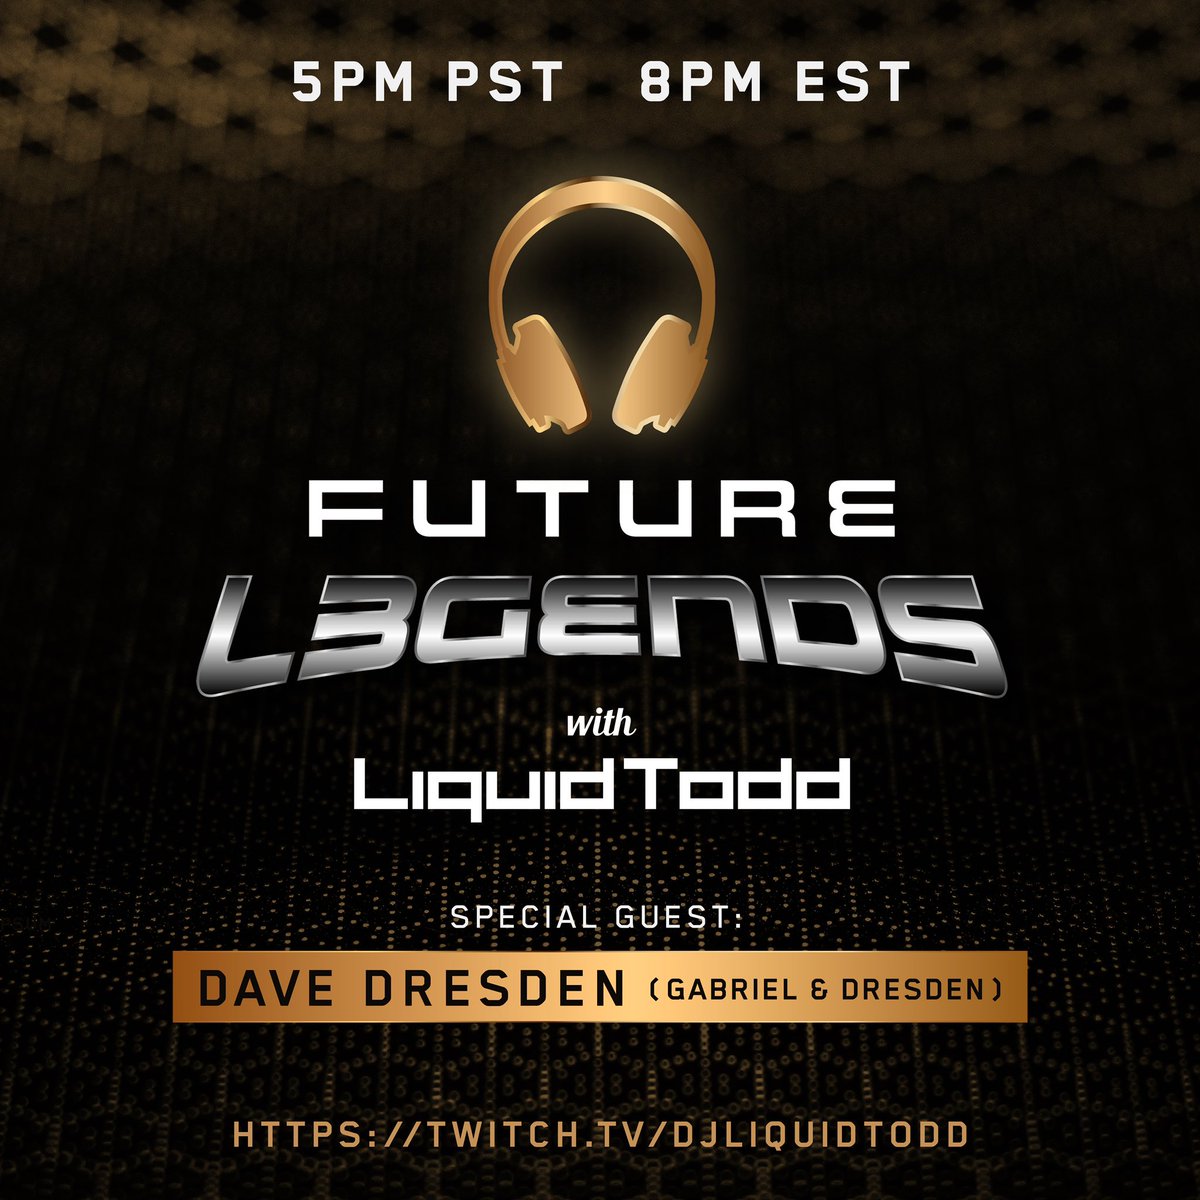 We got a big guest on Future L3GENDS this week. Dave Dresden from @GabrielNDresden and I will be listening to your new songs so submit your tracks starting at 5pmPST Thursday! It all goes down on twitch.tv/djliquidtodd